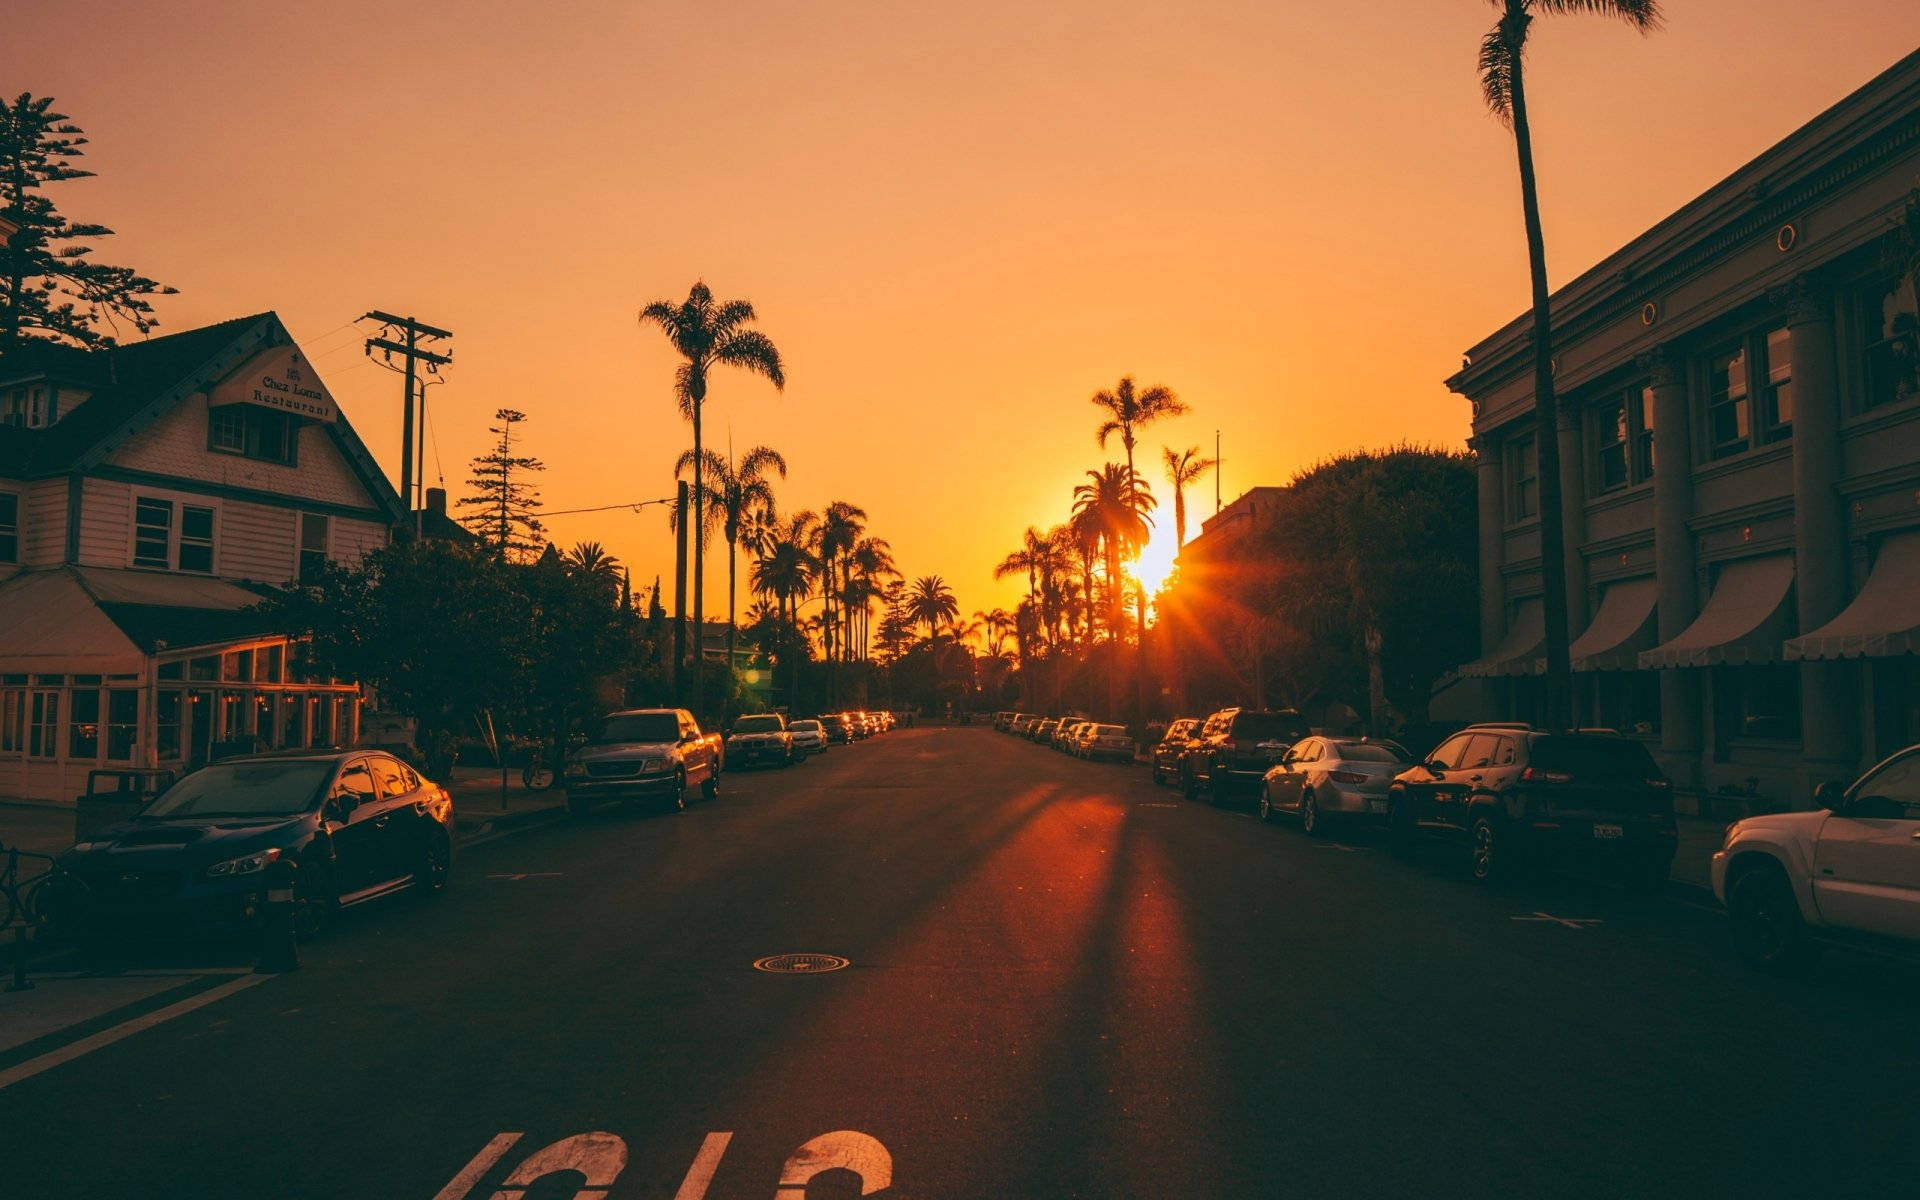 Peaceful Street During Neon Yellow Sunset